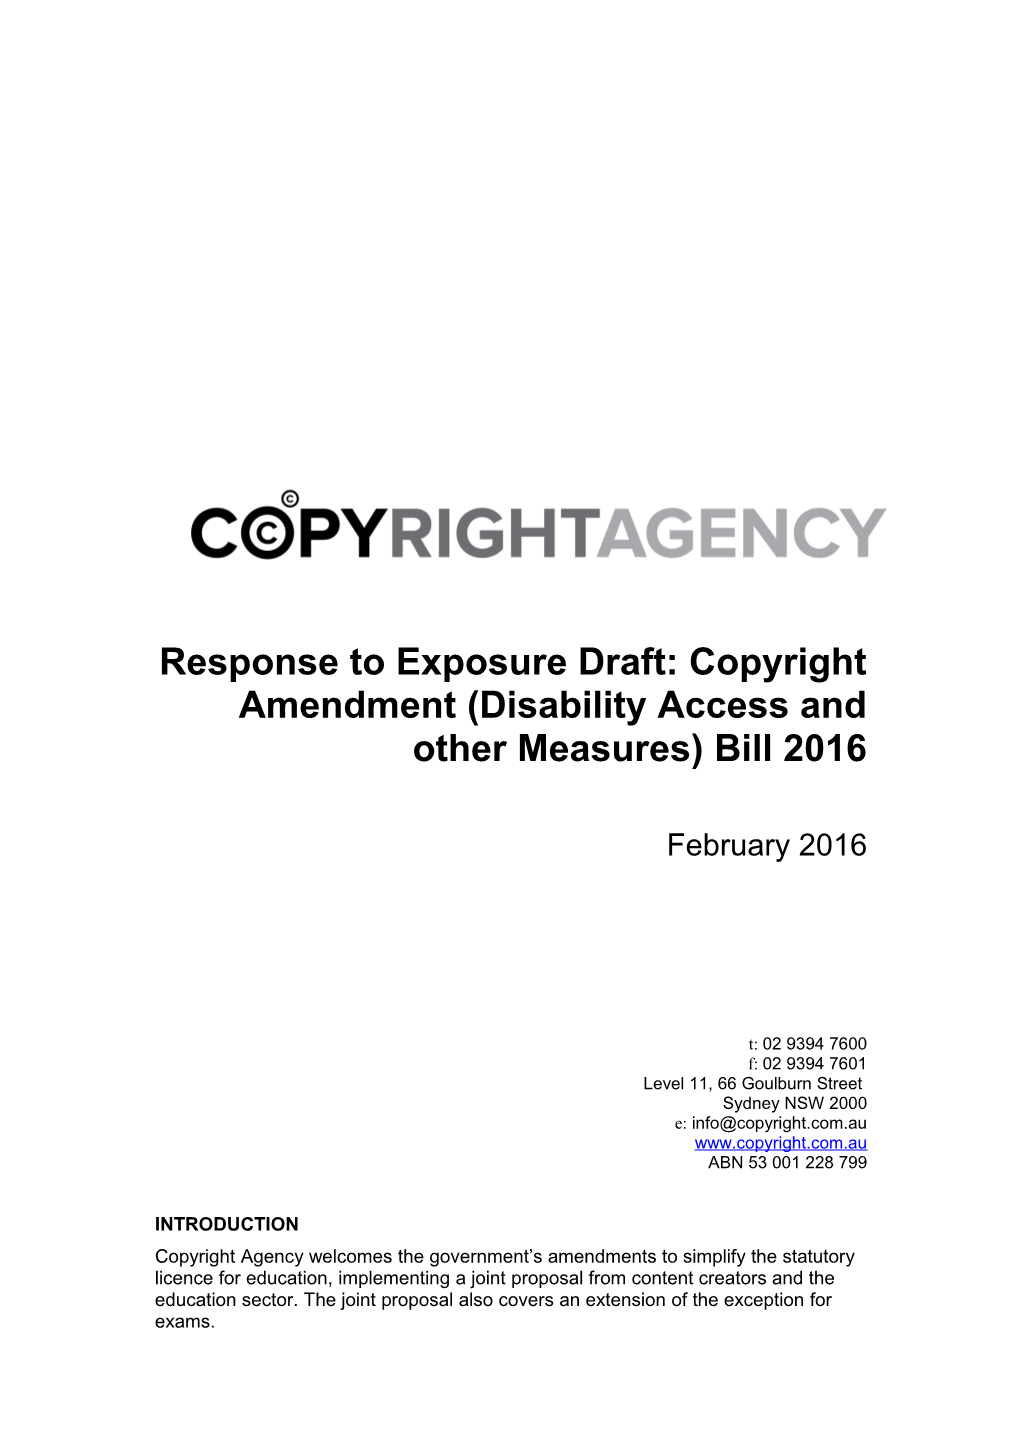 Response to Exposure Draft: Copyright Amendment (Disability Access and Other Measures)